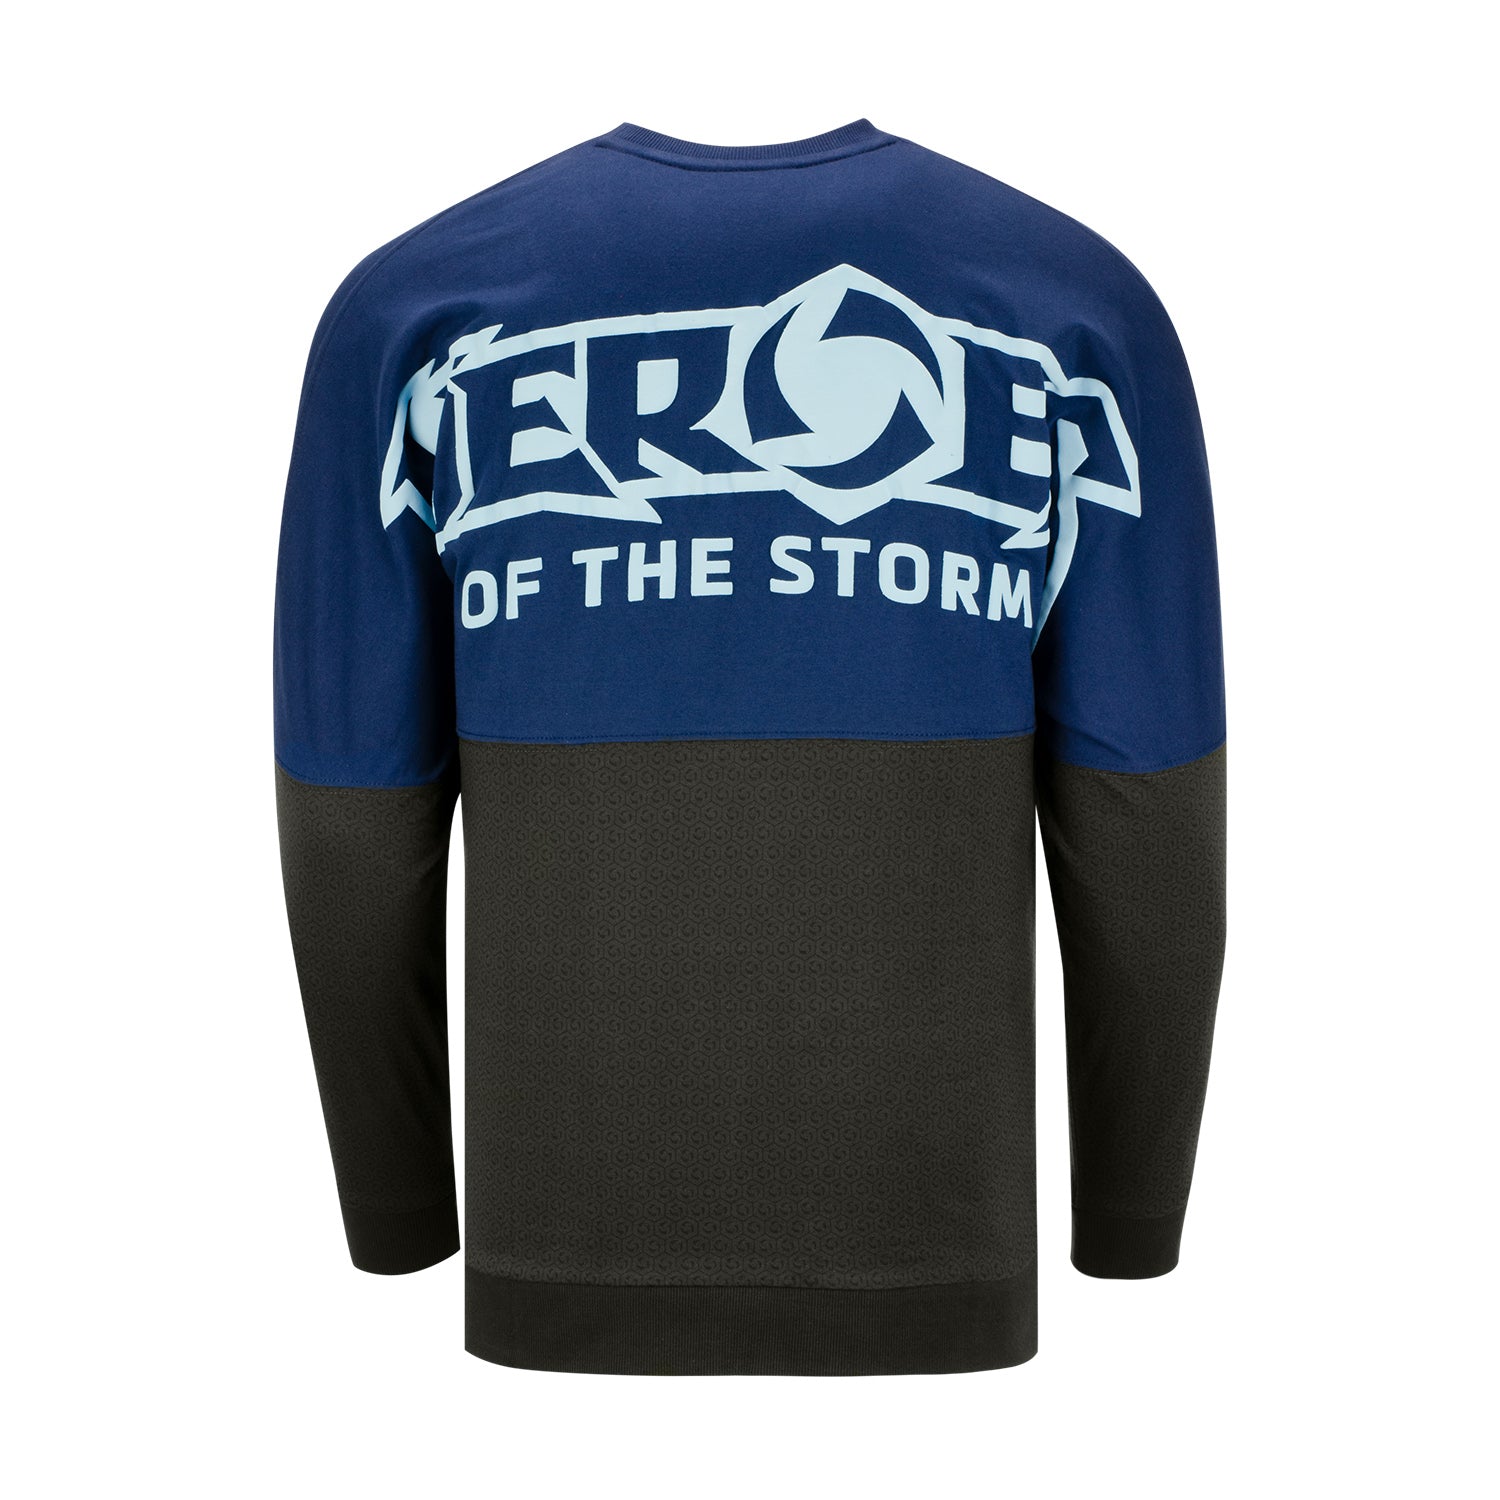 Heroes of the Storm Billboard Long Sleeve Blue T-Shirt - Back View